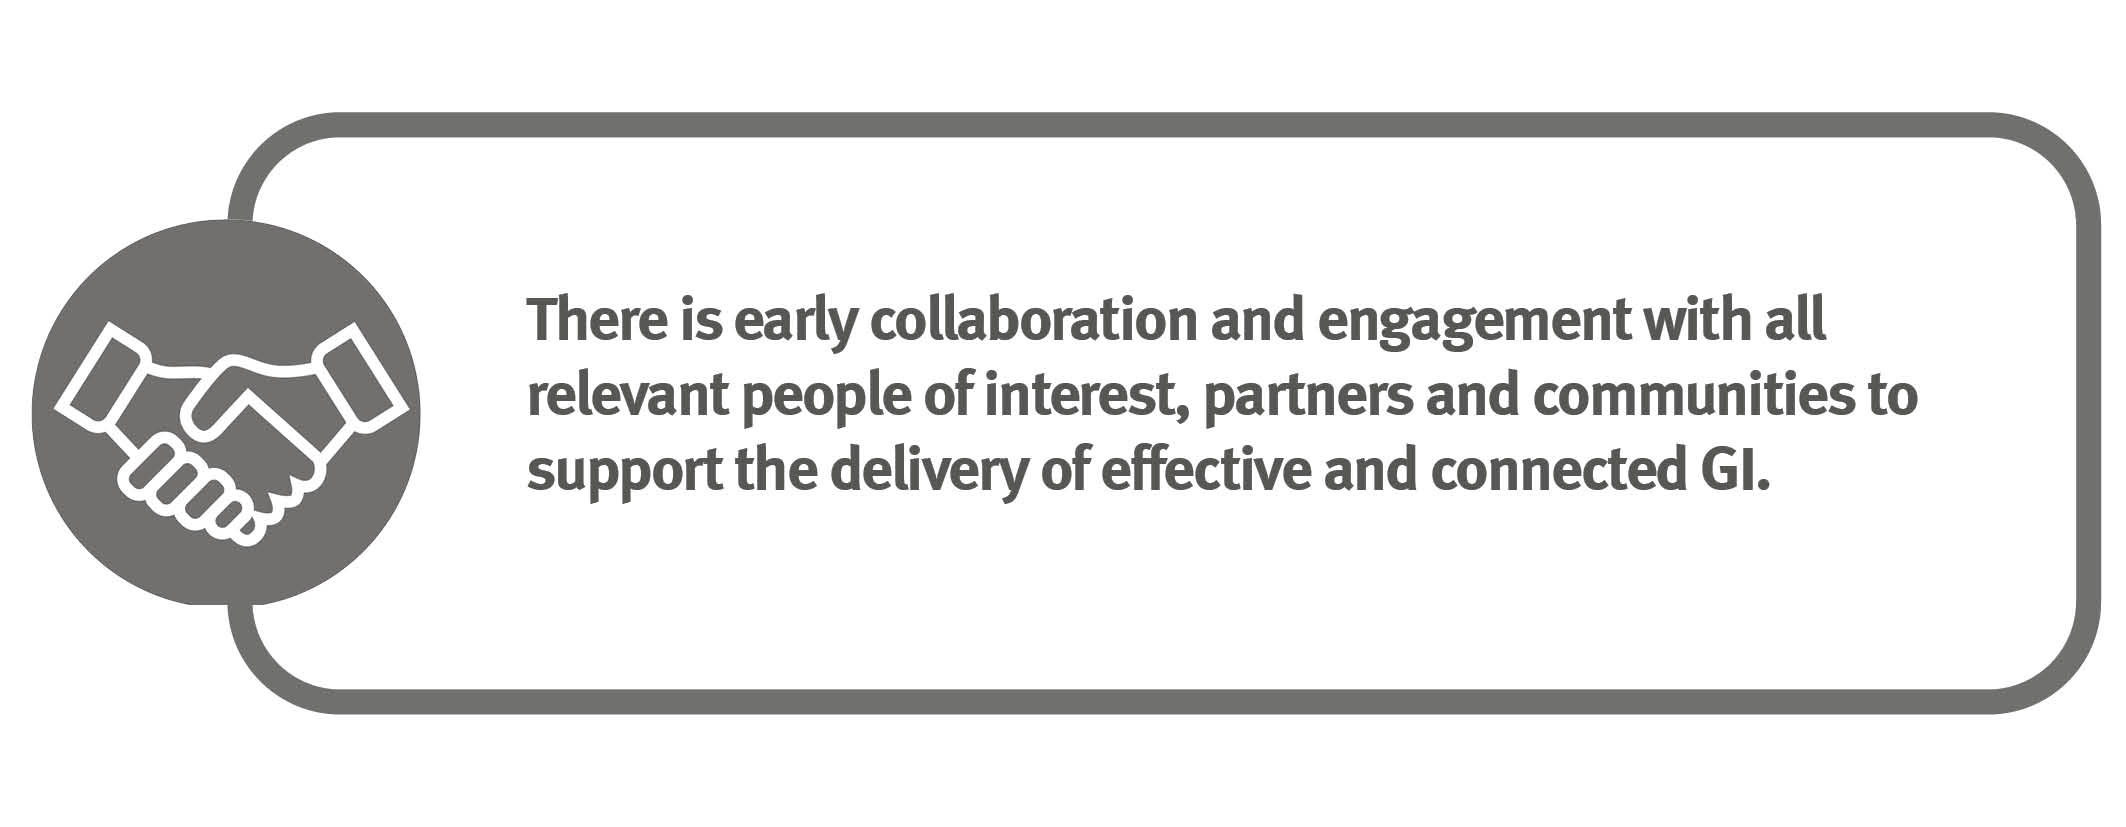 Principle 4: Early Collaboration and Engagement